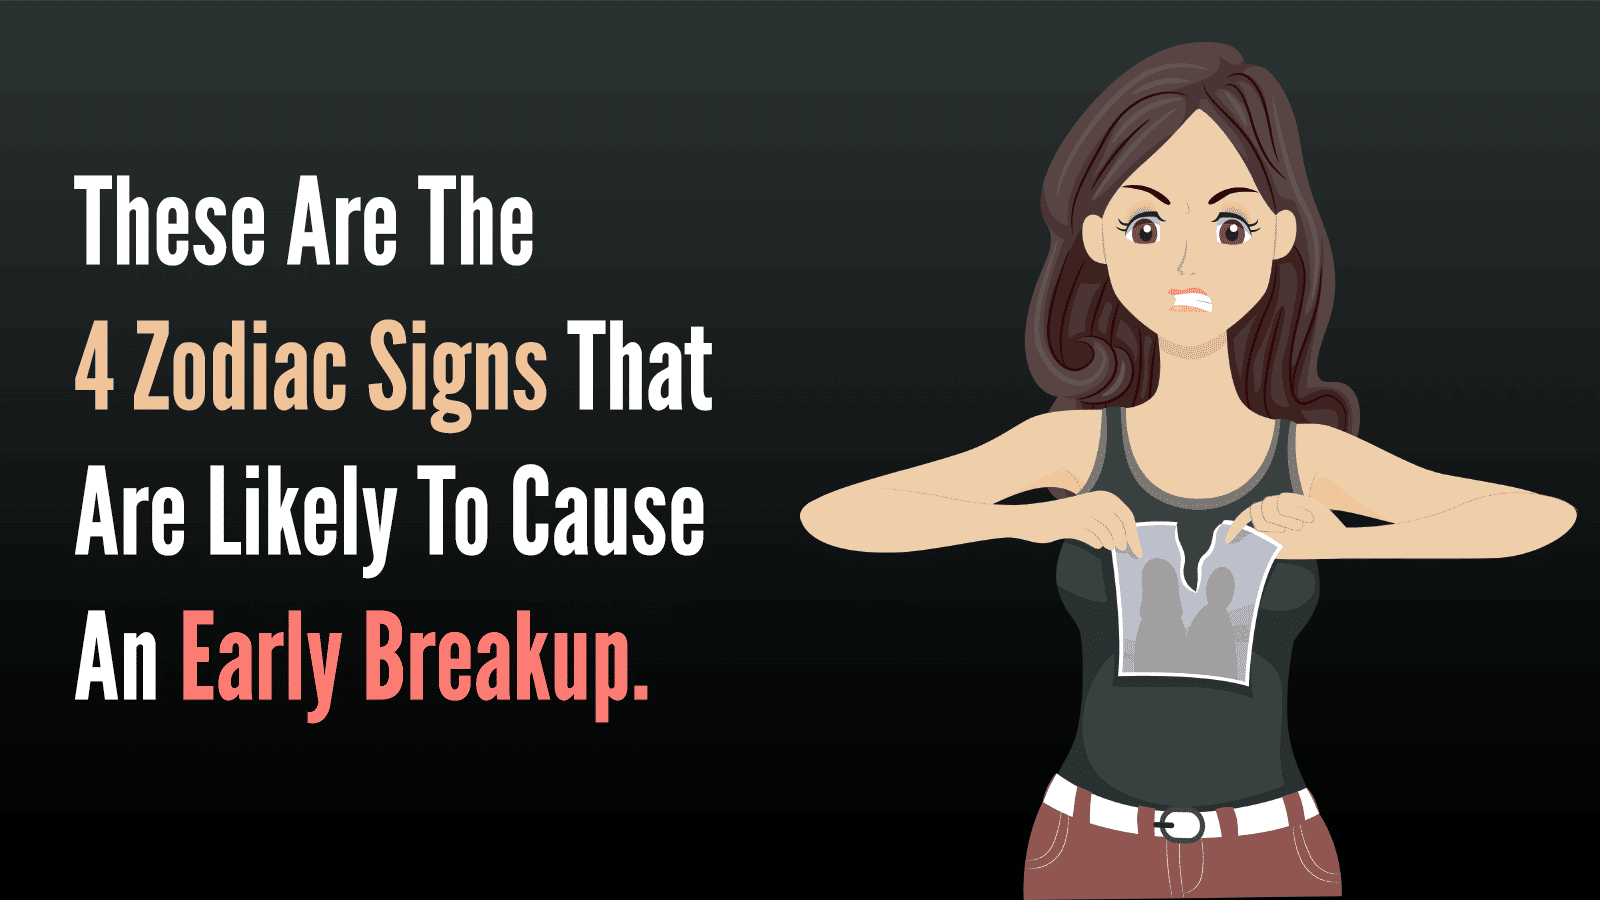 These Are The 4 Zodiac Signs That Are Likely To Cause An Early Breakup ...